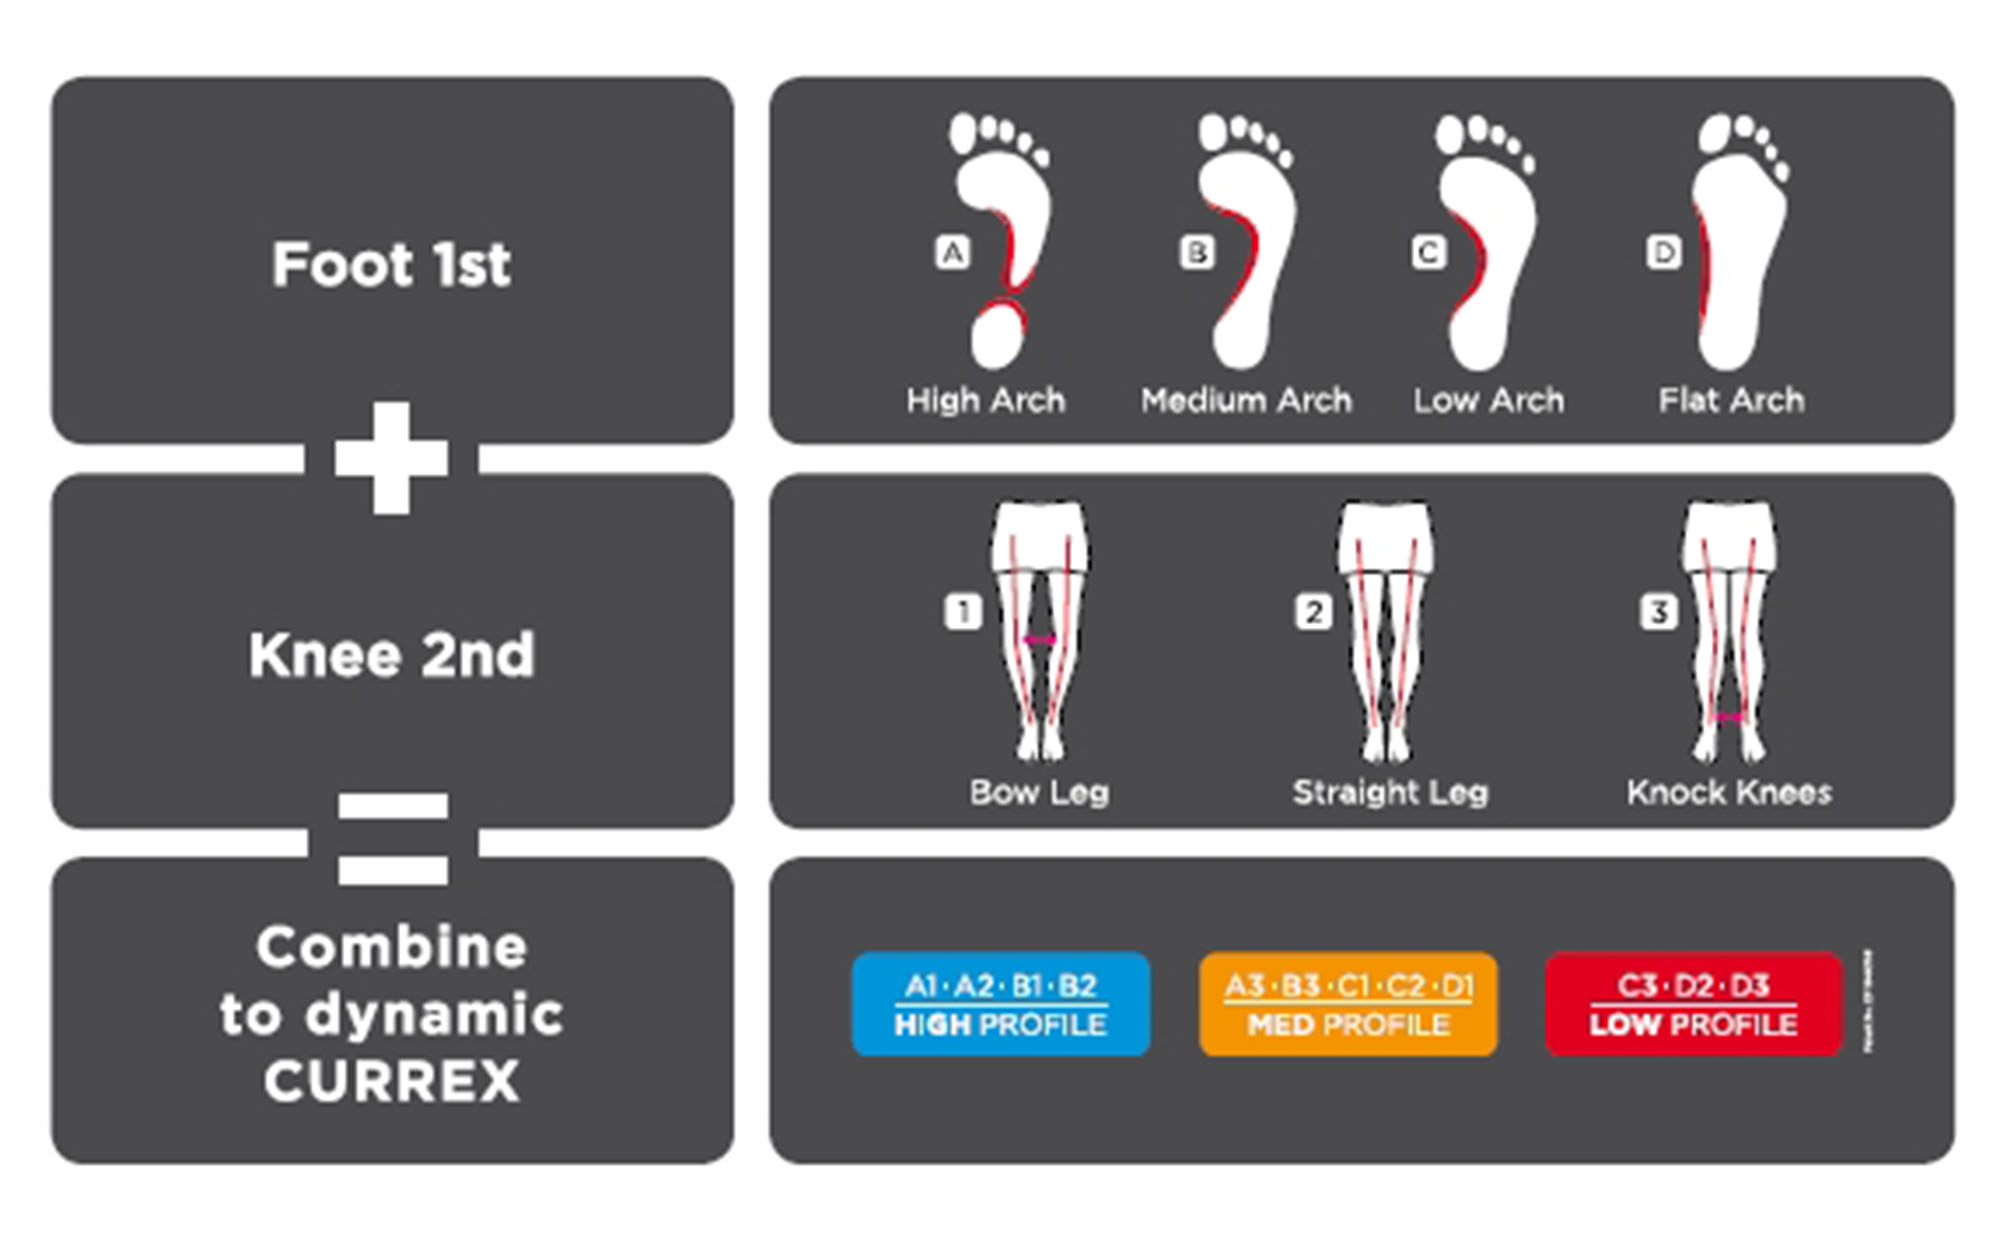 Currex's sizing profile takes into account arch height, shoe size, and leg axis.